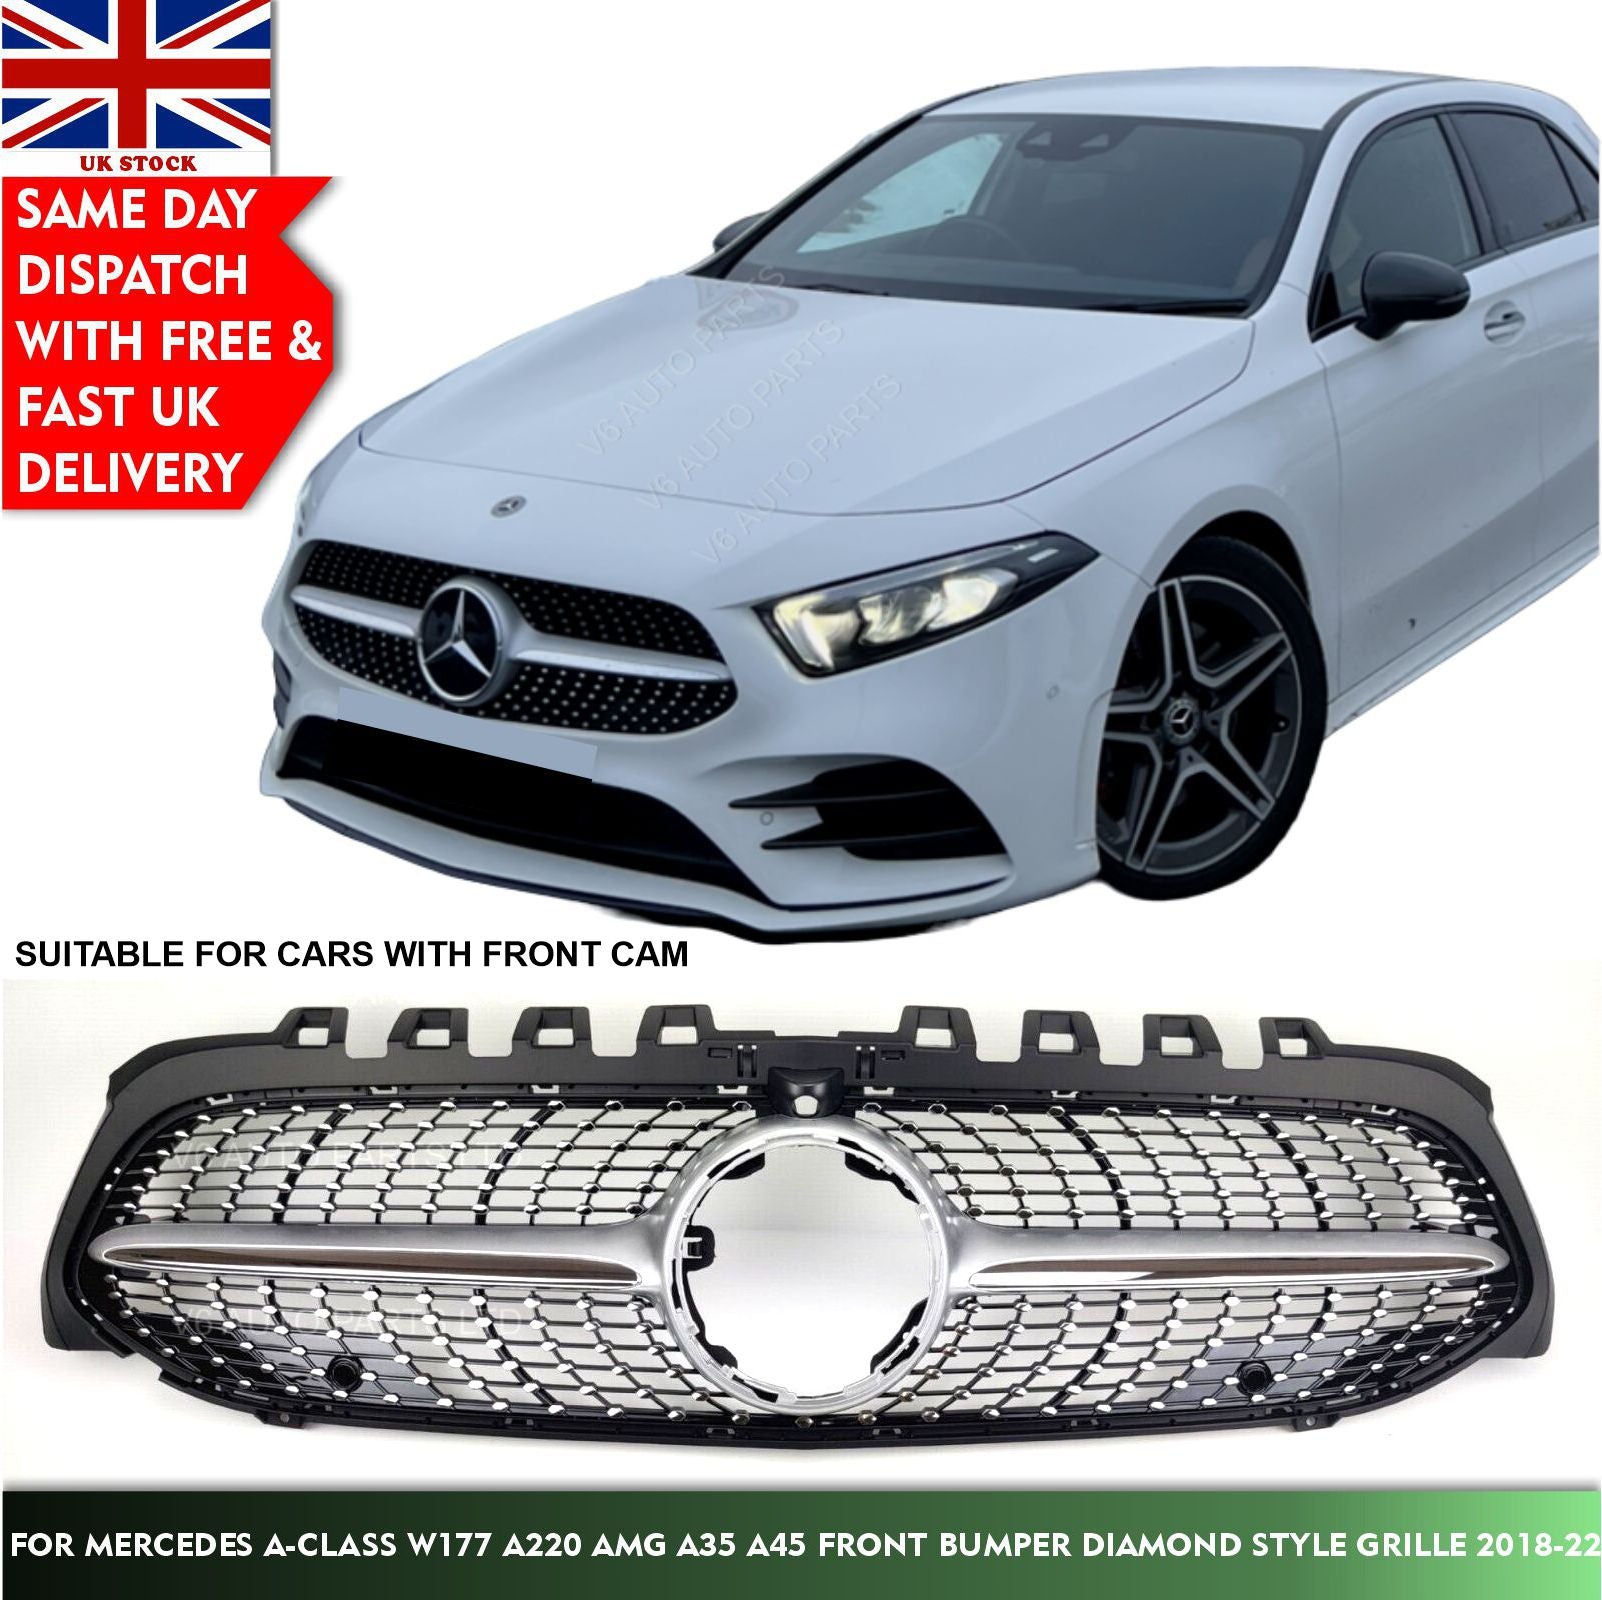 For Mercedes A-Class W177 A220 AMG A35 A45 Front Bumper Diamond Style Grille 2018-22